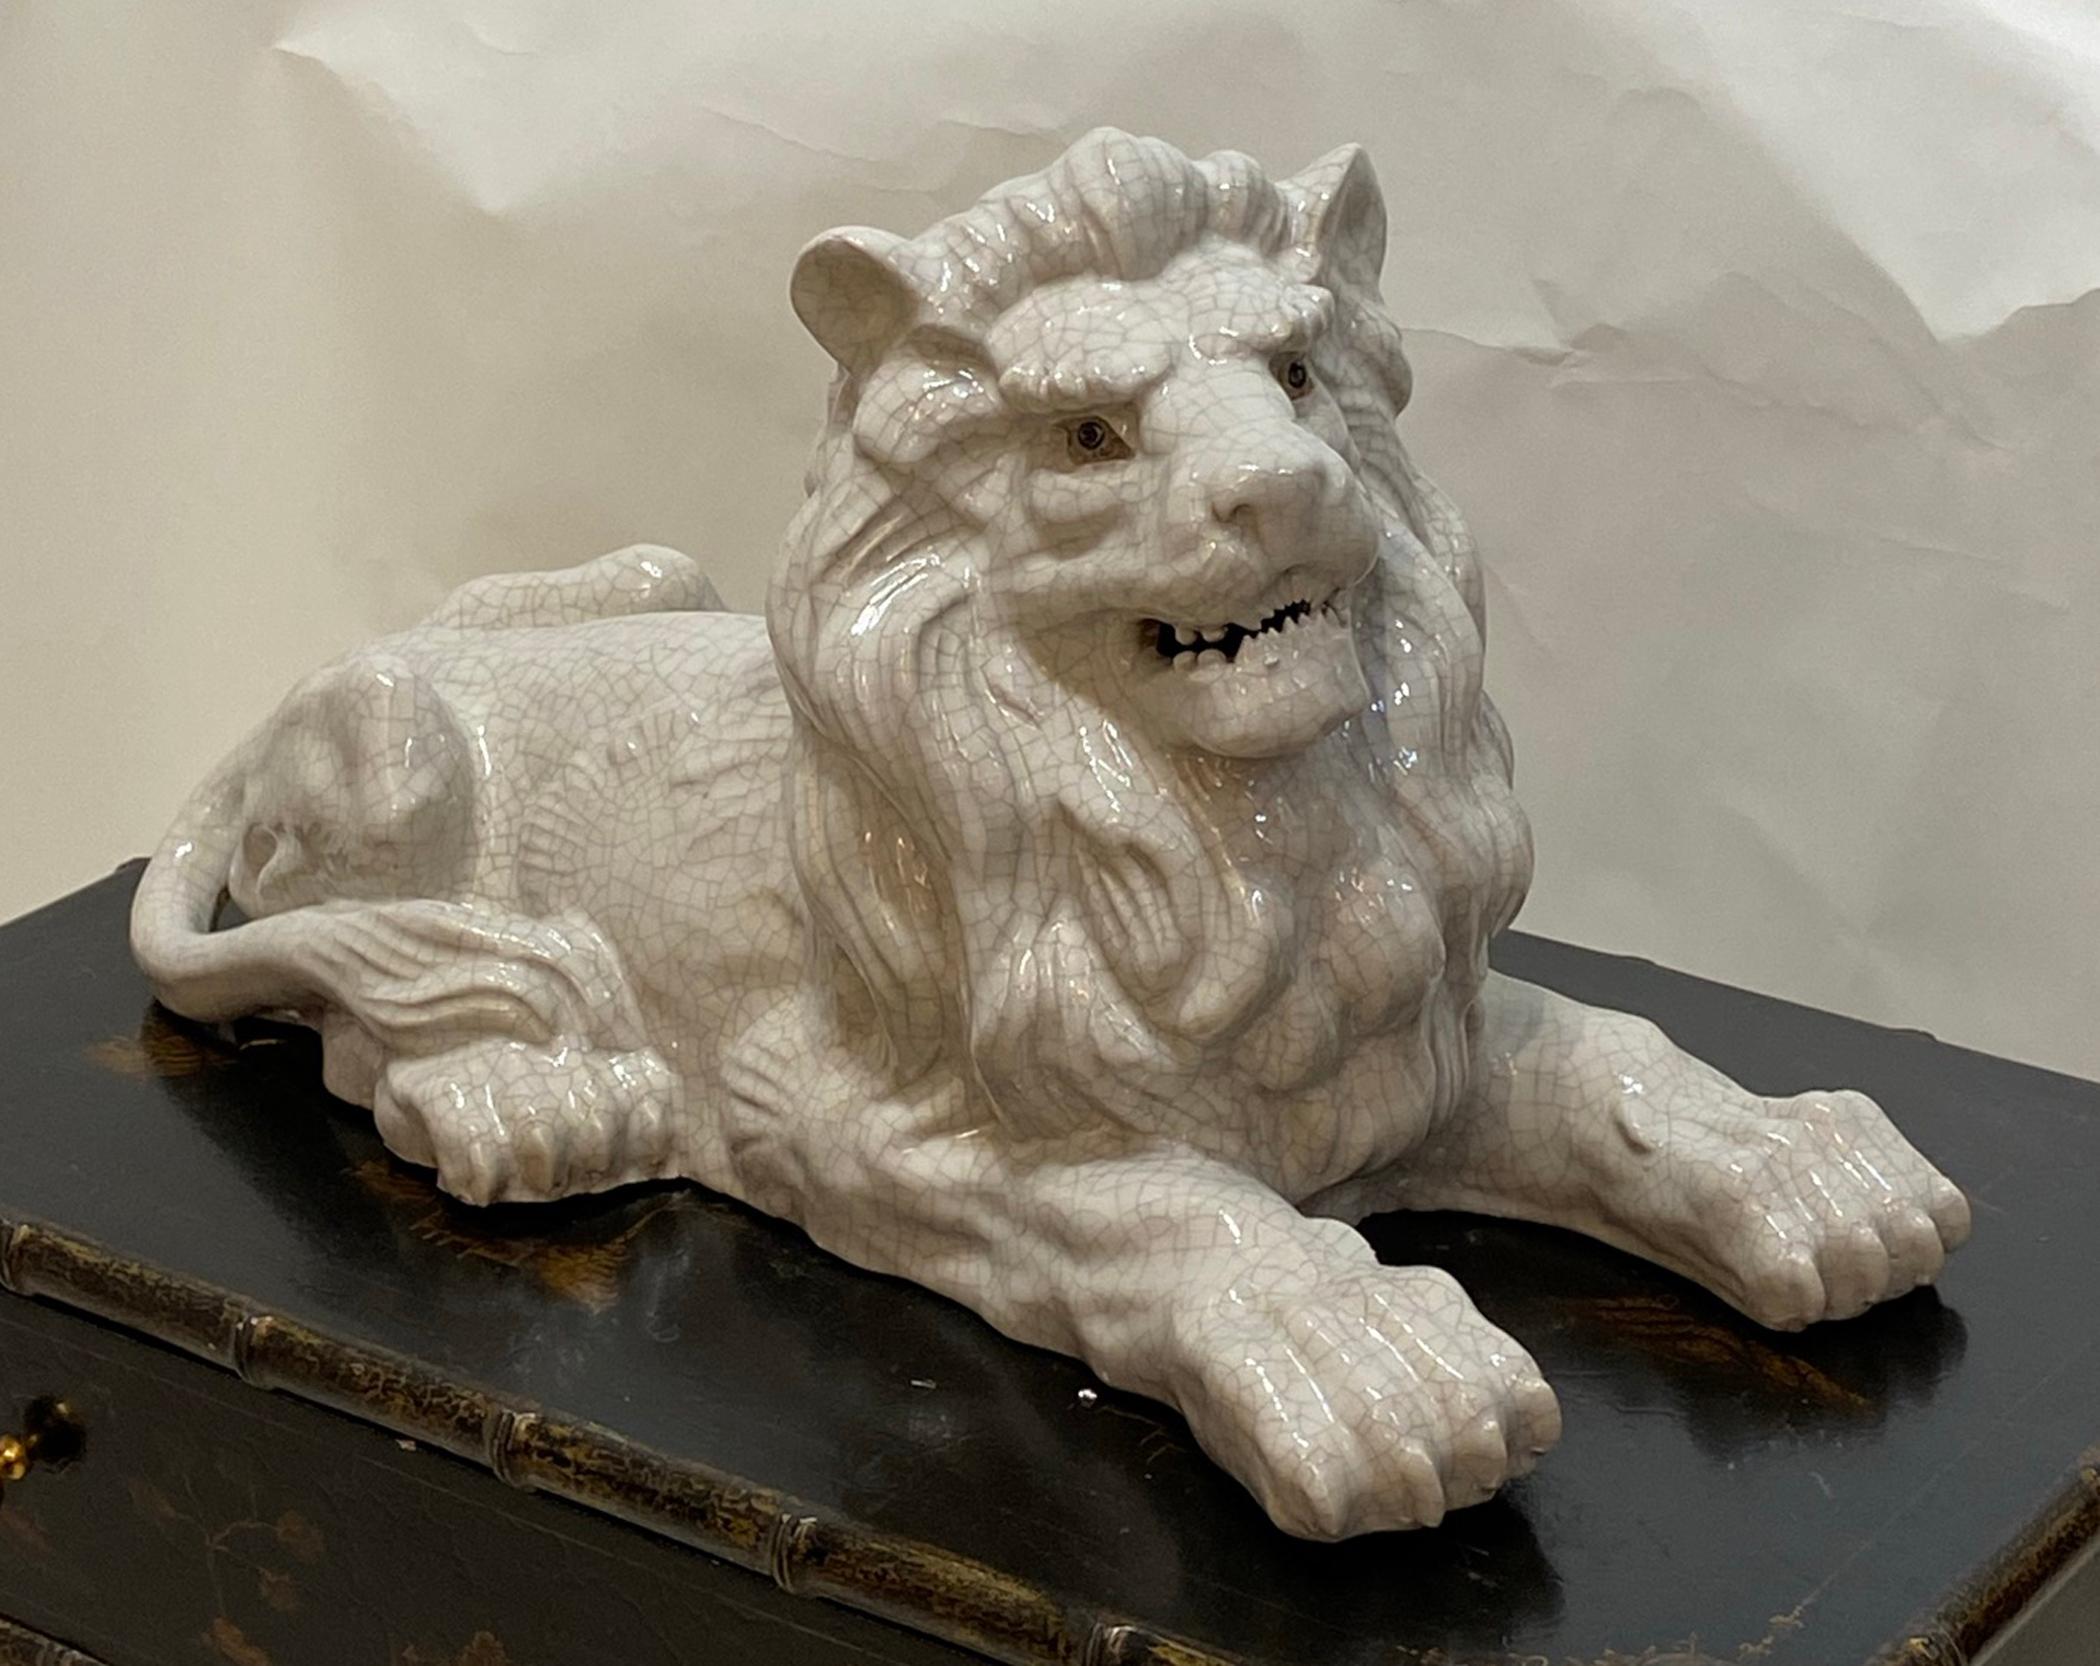 Majestic terracotta lion with white crackle glaze finish. This terra cotta sculpture could be used either indoors or out. In very good condition no chips or cracks.